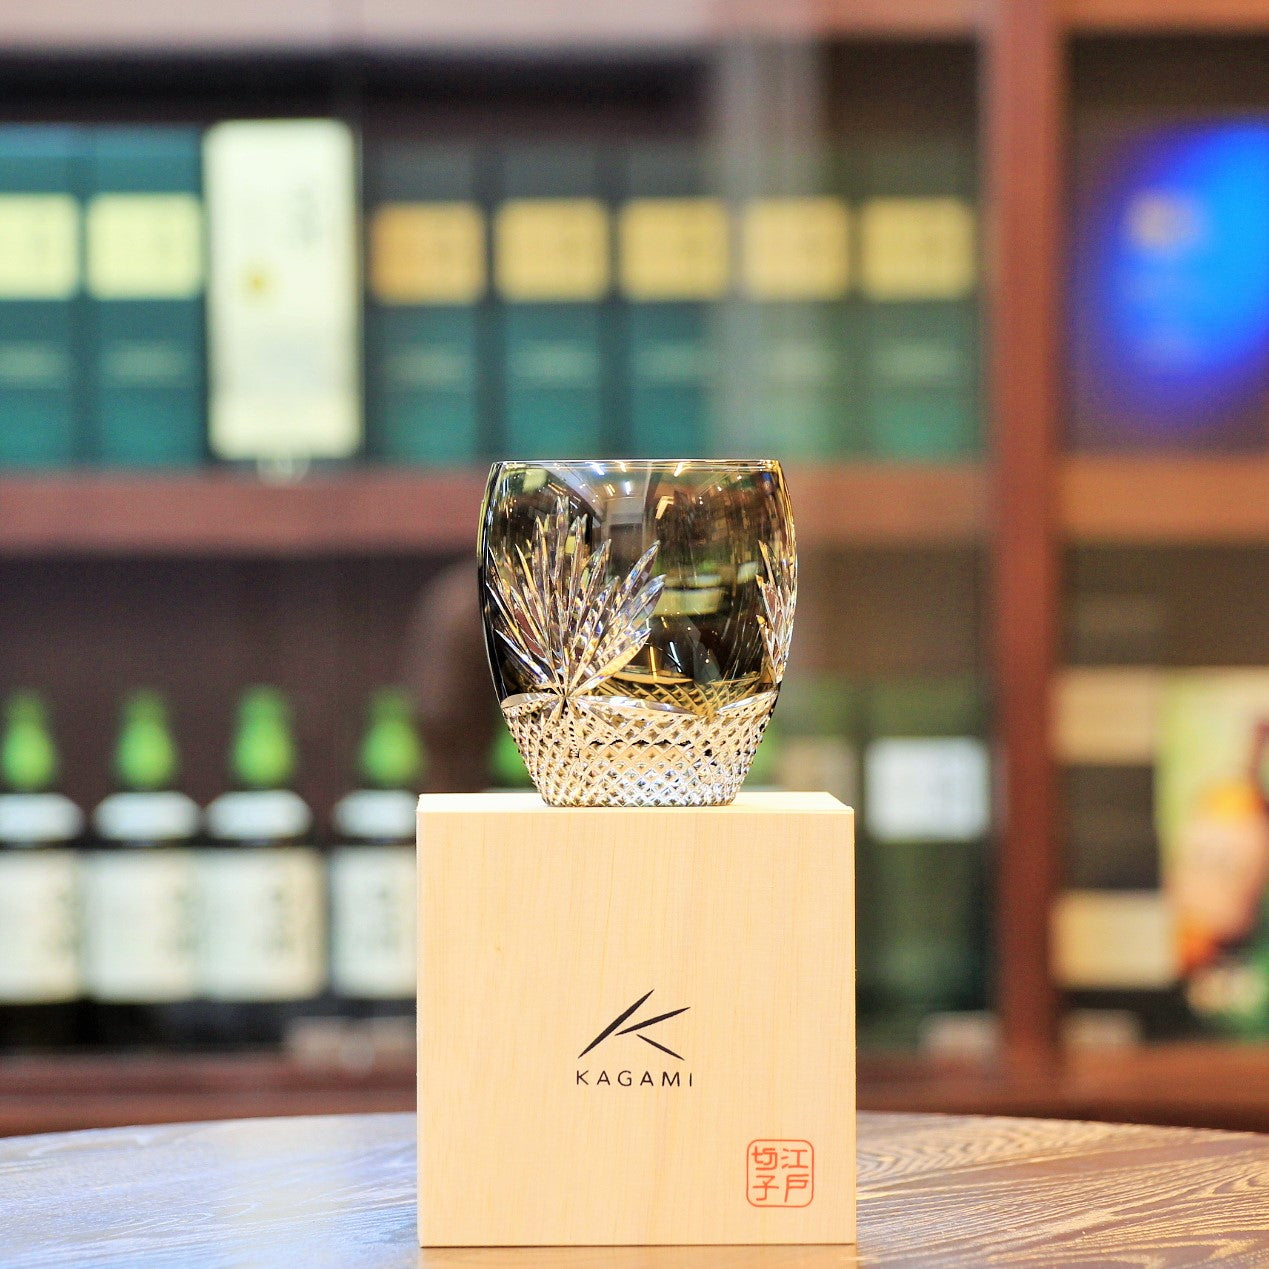 This beautiful hand cut glass comes in a wooden gift box. Perfect for enjoying a glass of whisky either straight up or on the rocks! Also perfect for other iced drinks. "HANA series" is an adaptation of Kiriko featuring neat white flowers against subtle black backdrop. The cutting portrays imagery of the "Queen of the Night."